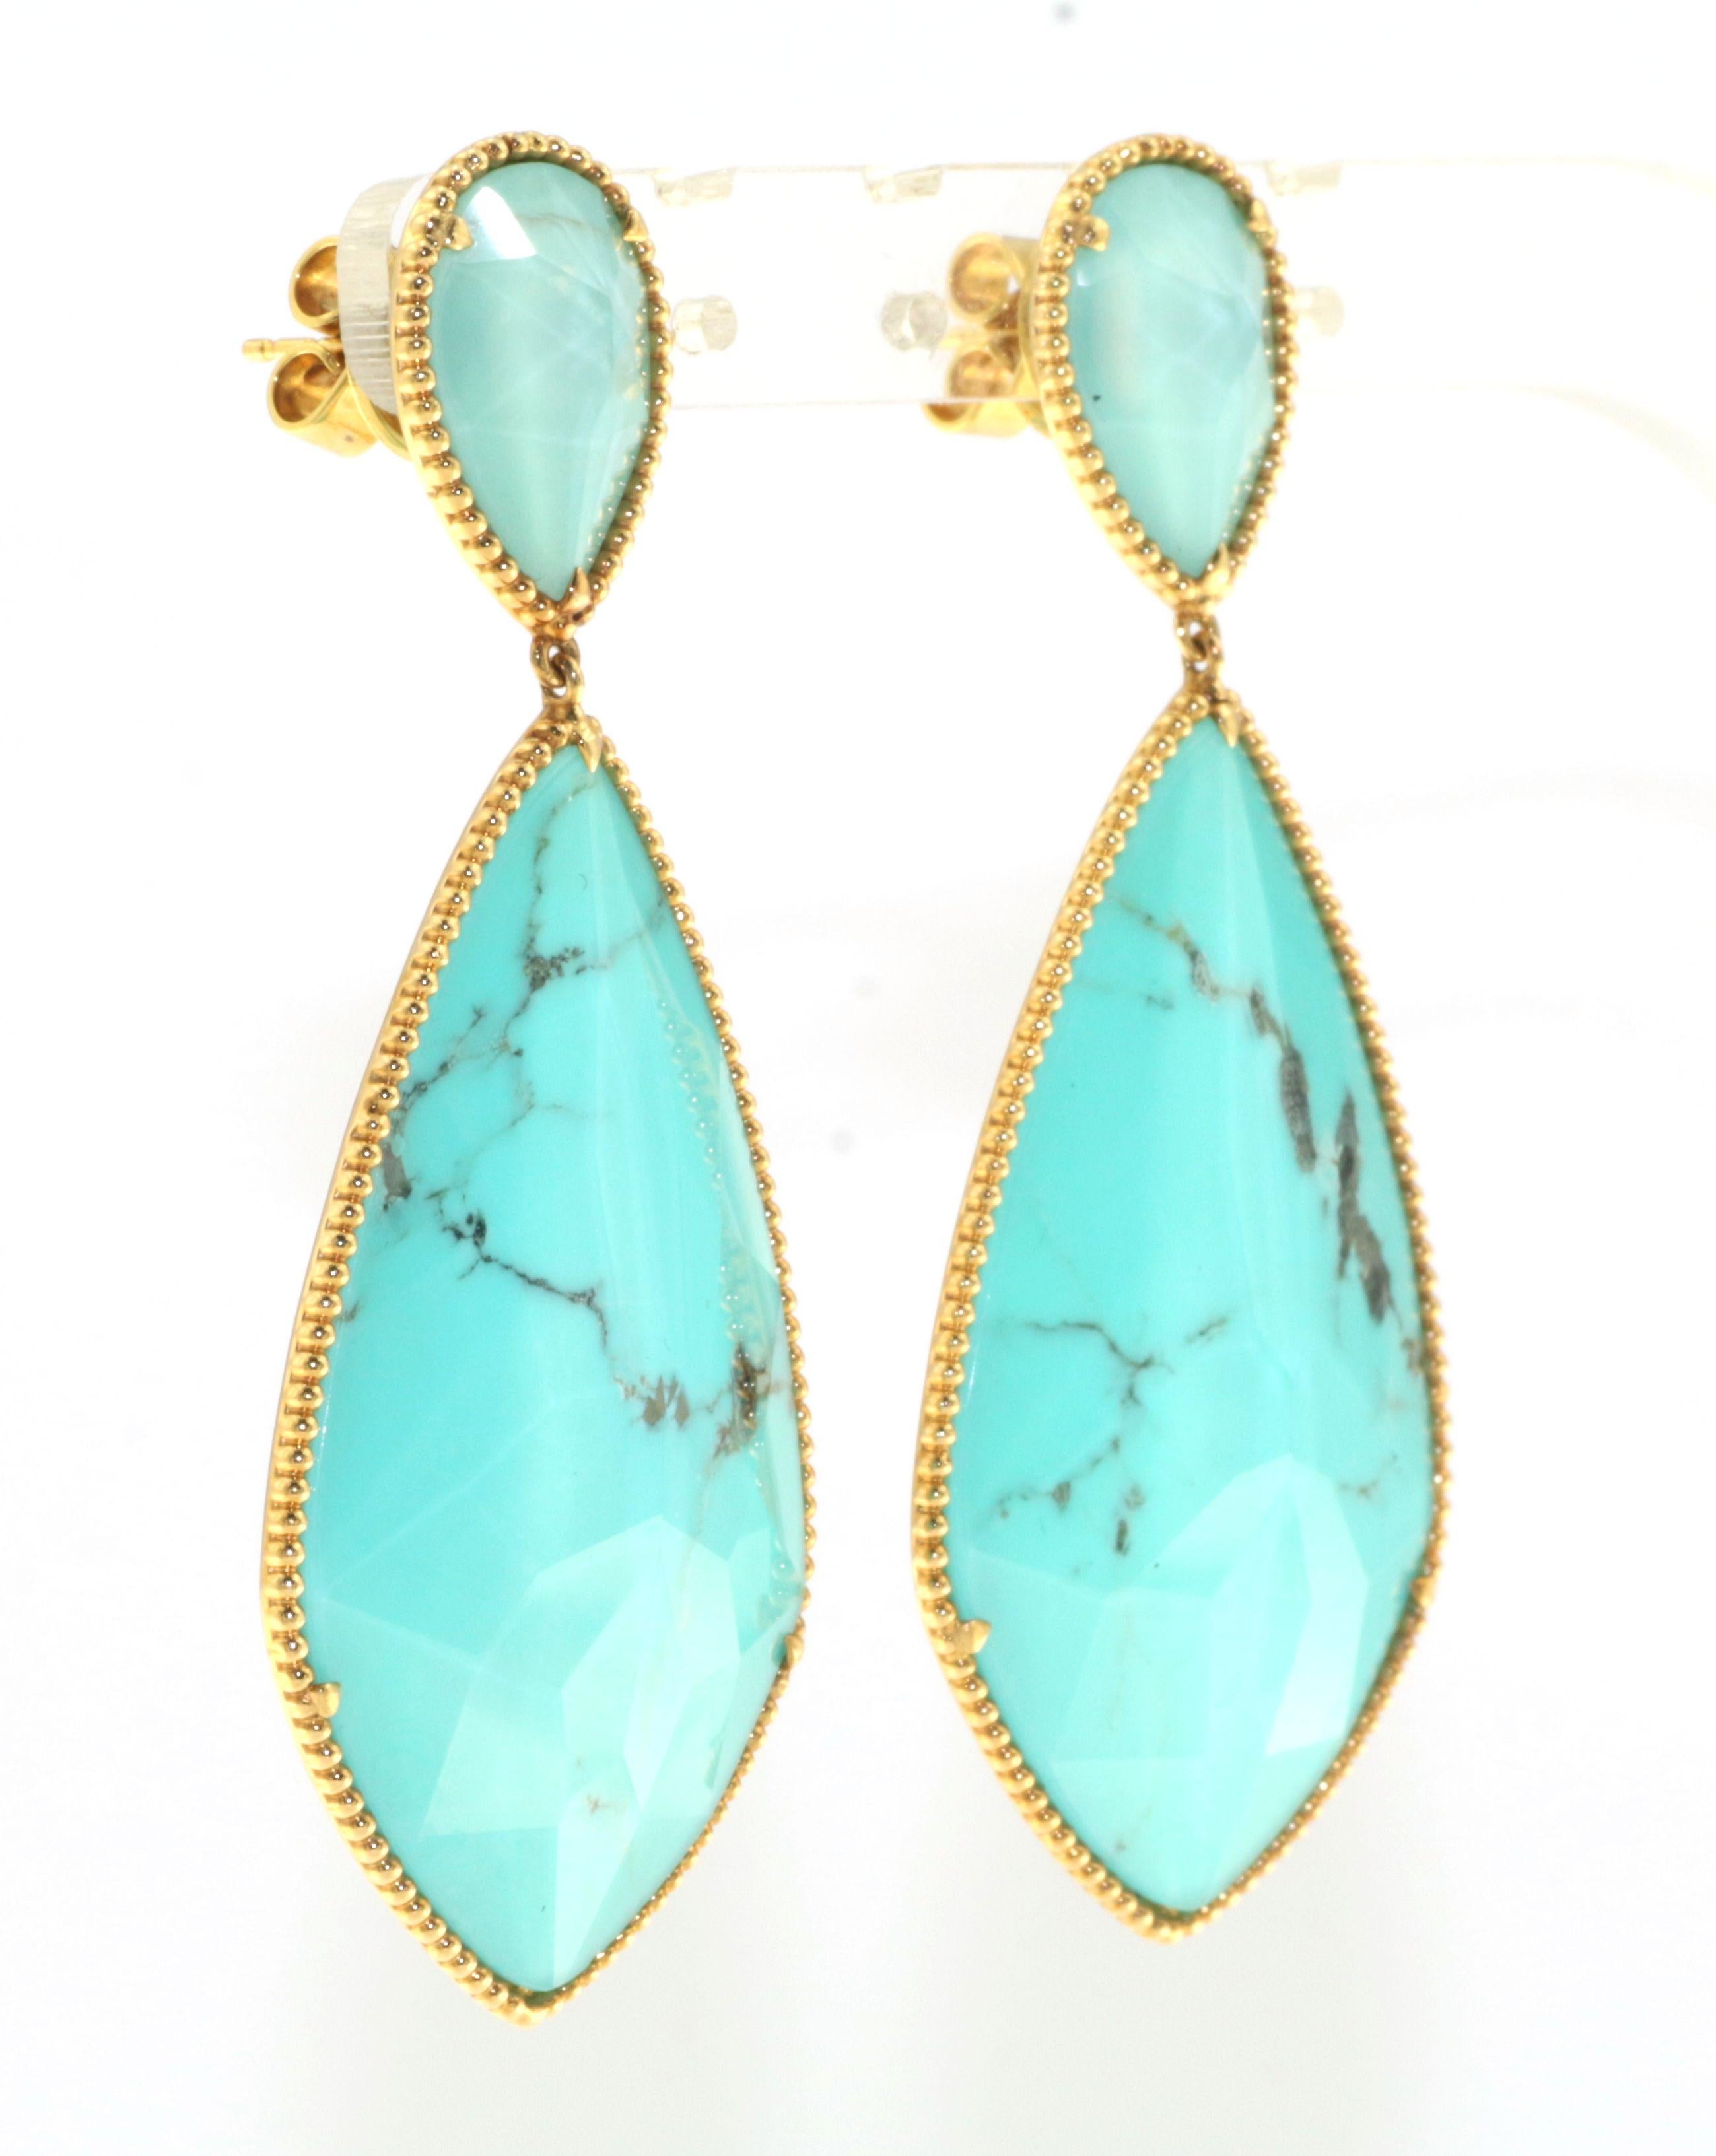 Discover the brilliance of these stunning dangle earrings that are sure to captivate. Exquisitely crafted in luminous 18 karat yellow gold, these earrings showcase mesmerizing turquoise quartz doublets weighing a remarkable 53.31 carats.

Each of